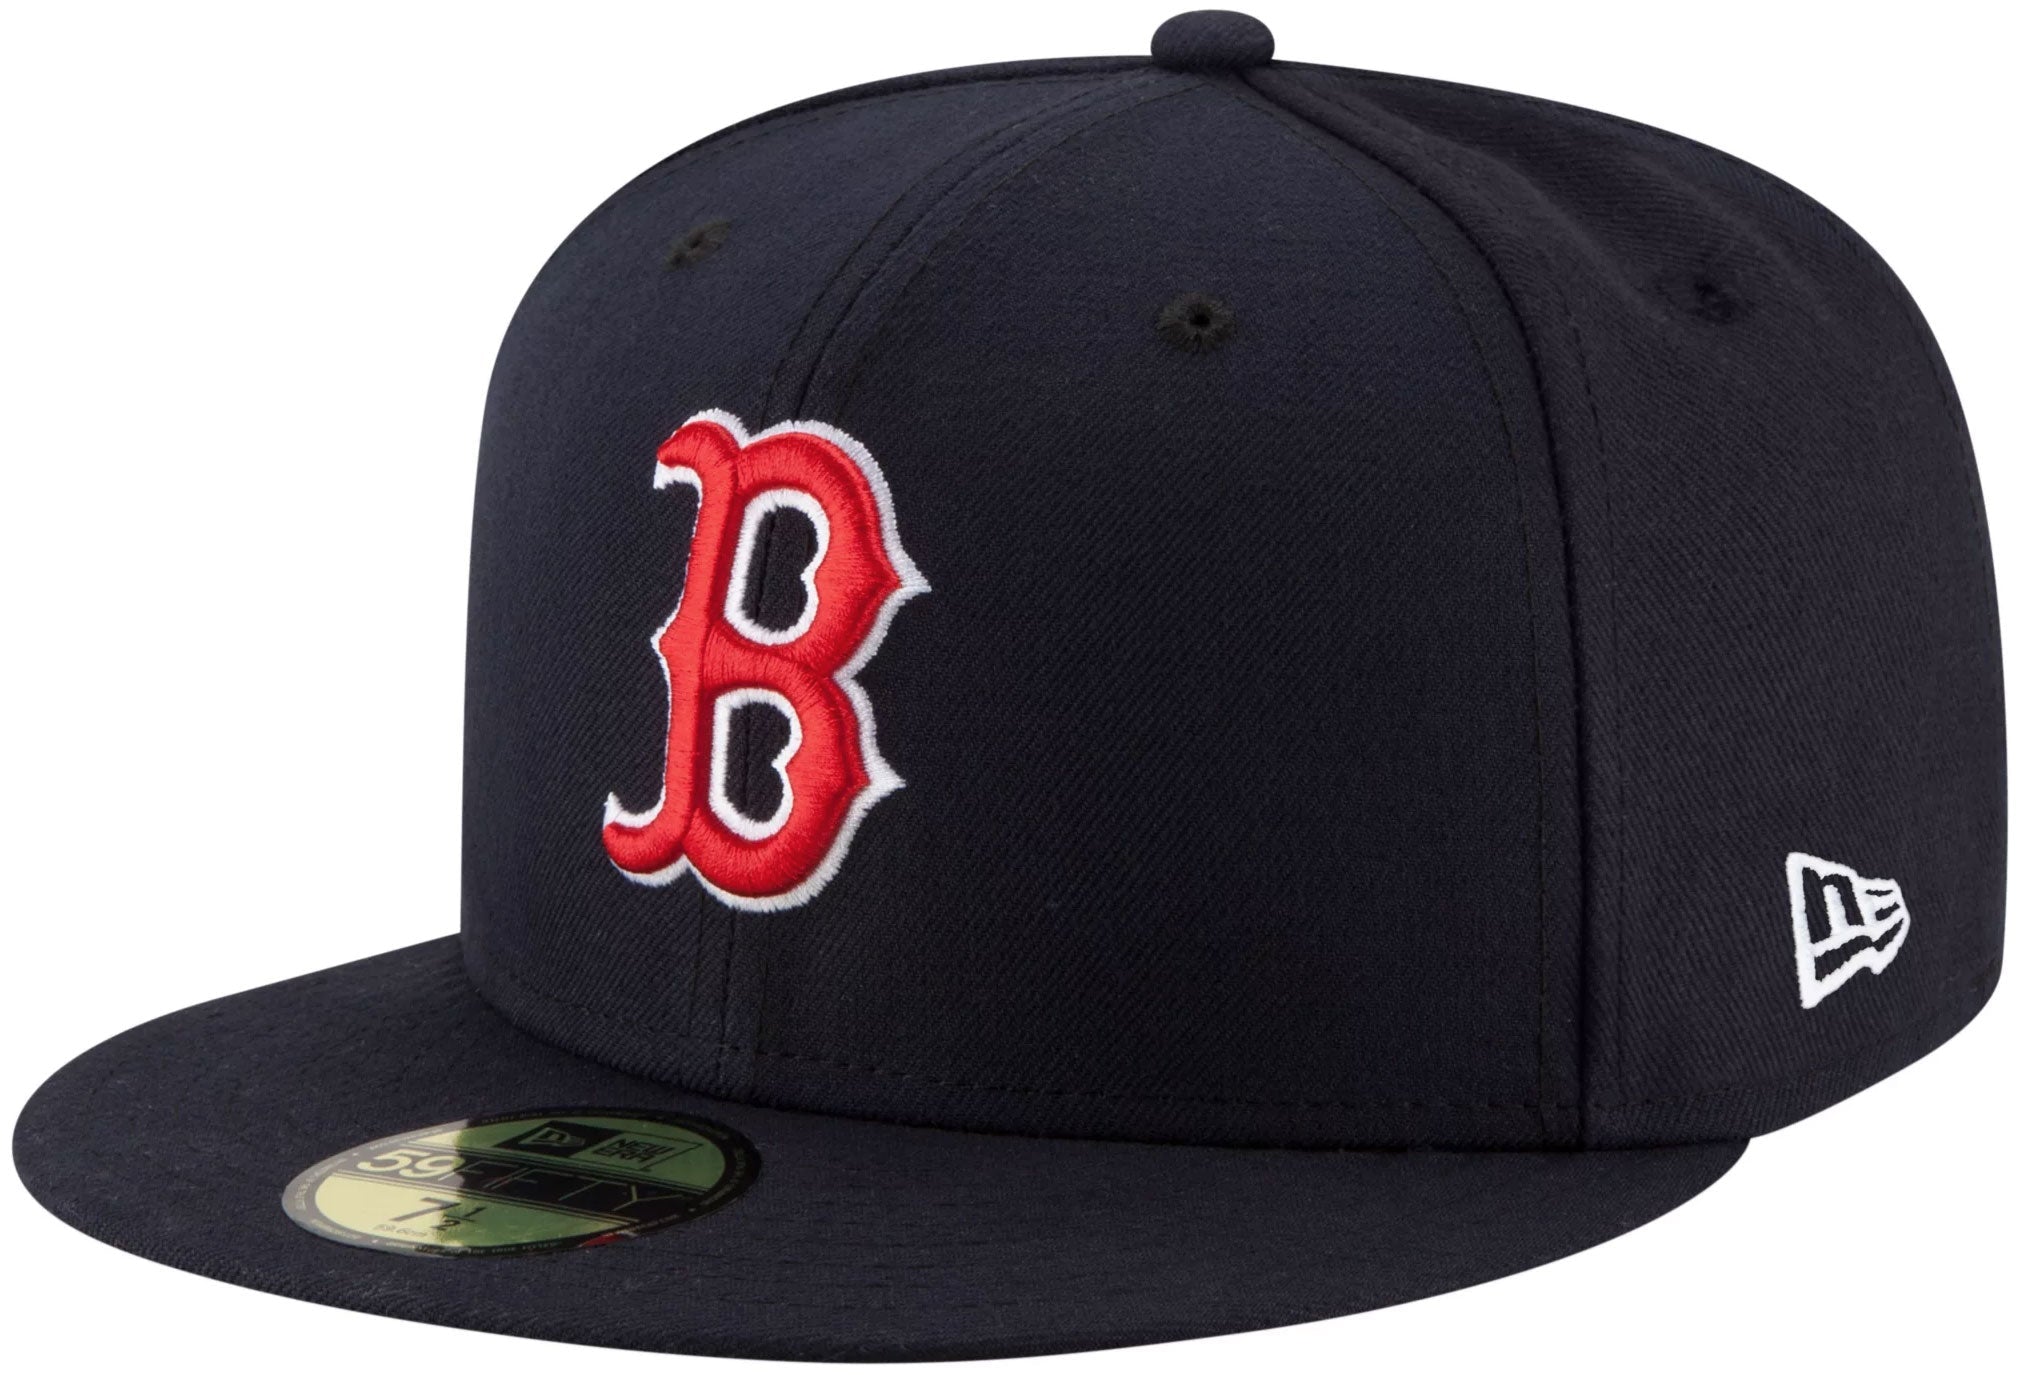 update alt-text with template New Era Cap - MLB-New Era-70331911-7 3/8-59FIFTY, 7 3/8, blue, Boston Red Sox, cap, caps, new arrivals, New Era, rpSKU_10047511-OSFA, rpSKU_70331909-7 3/8, rpSKU_70331911-7, rpSKU_70331911-7 1/2, rpSKU_70331911-7 5/8, unisex-Watches & Beyond